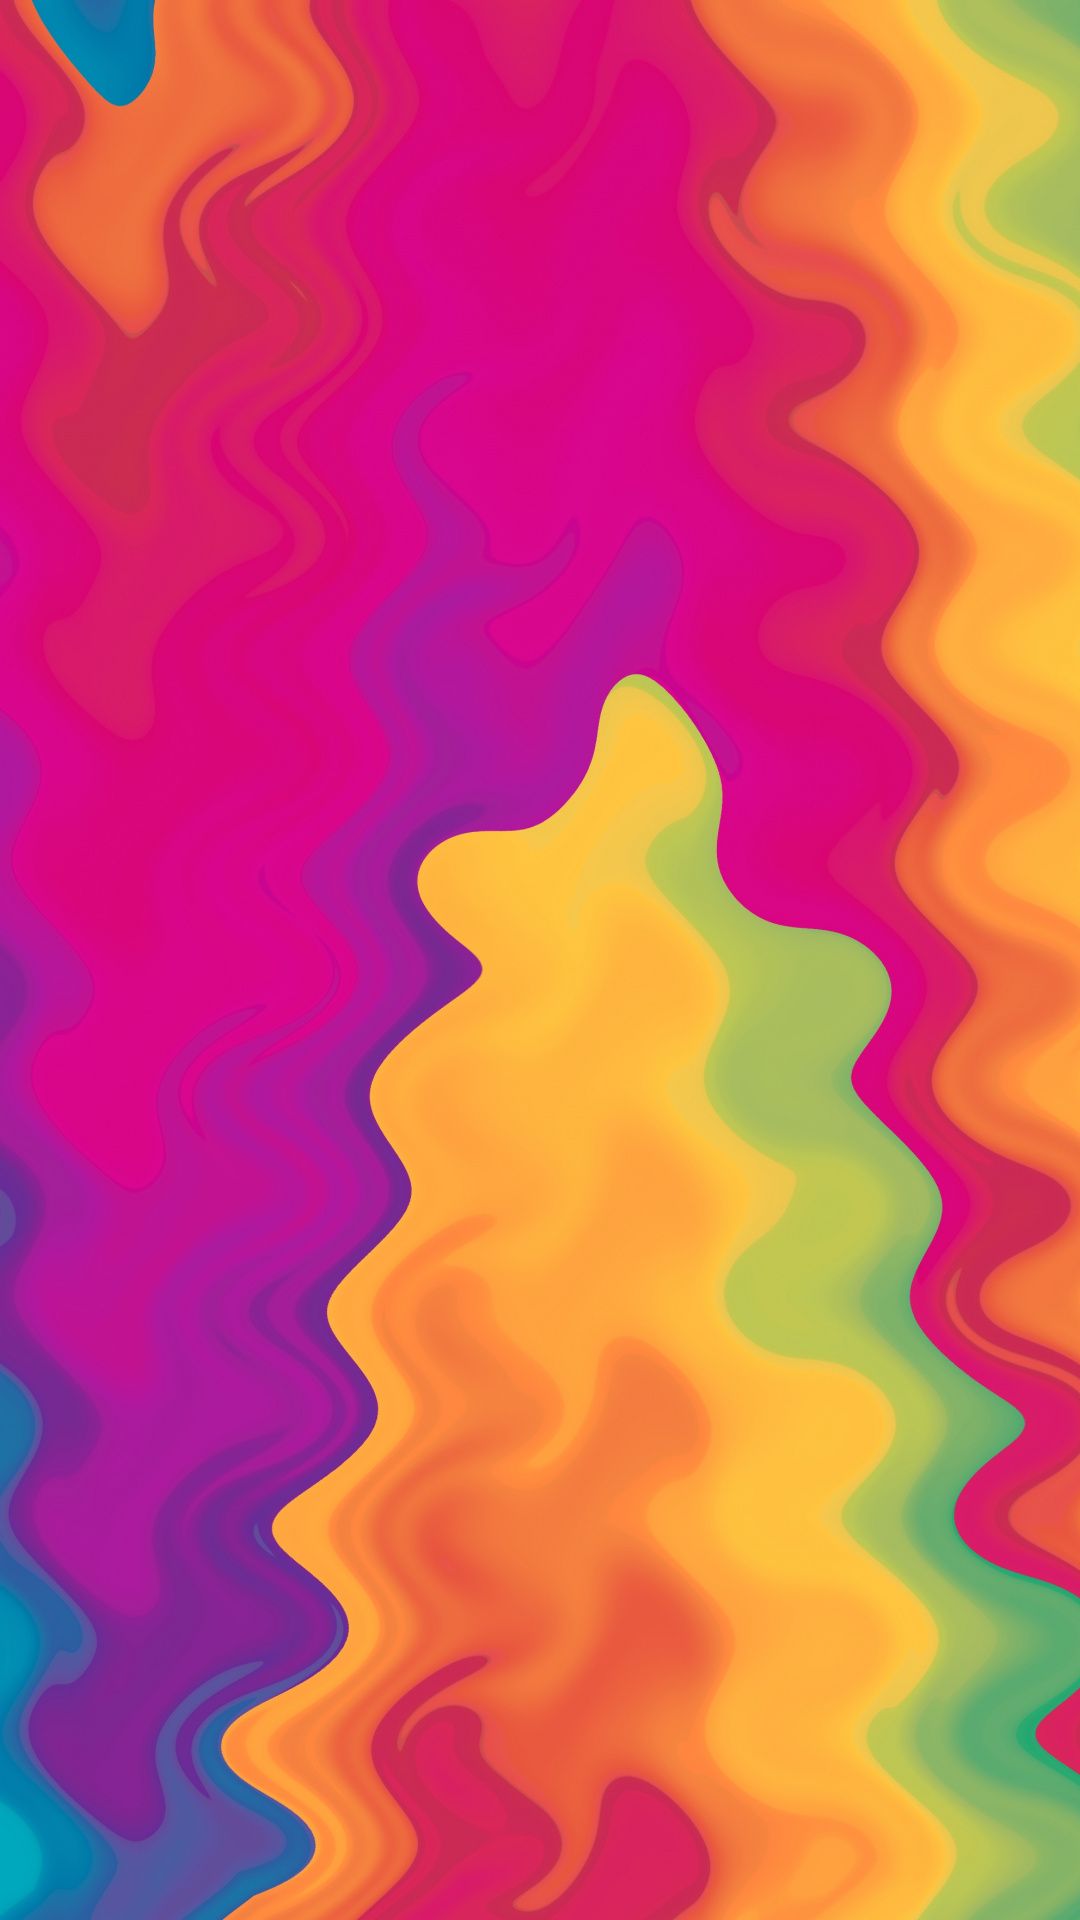 Waves Colorful Abstract Art Wallpaper In MkbHD